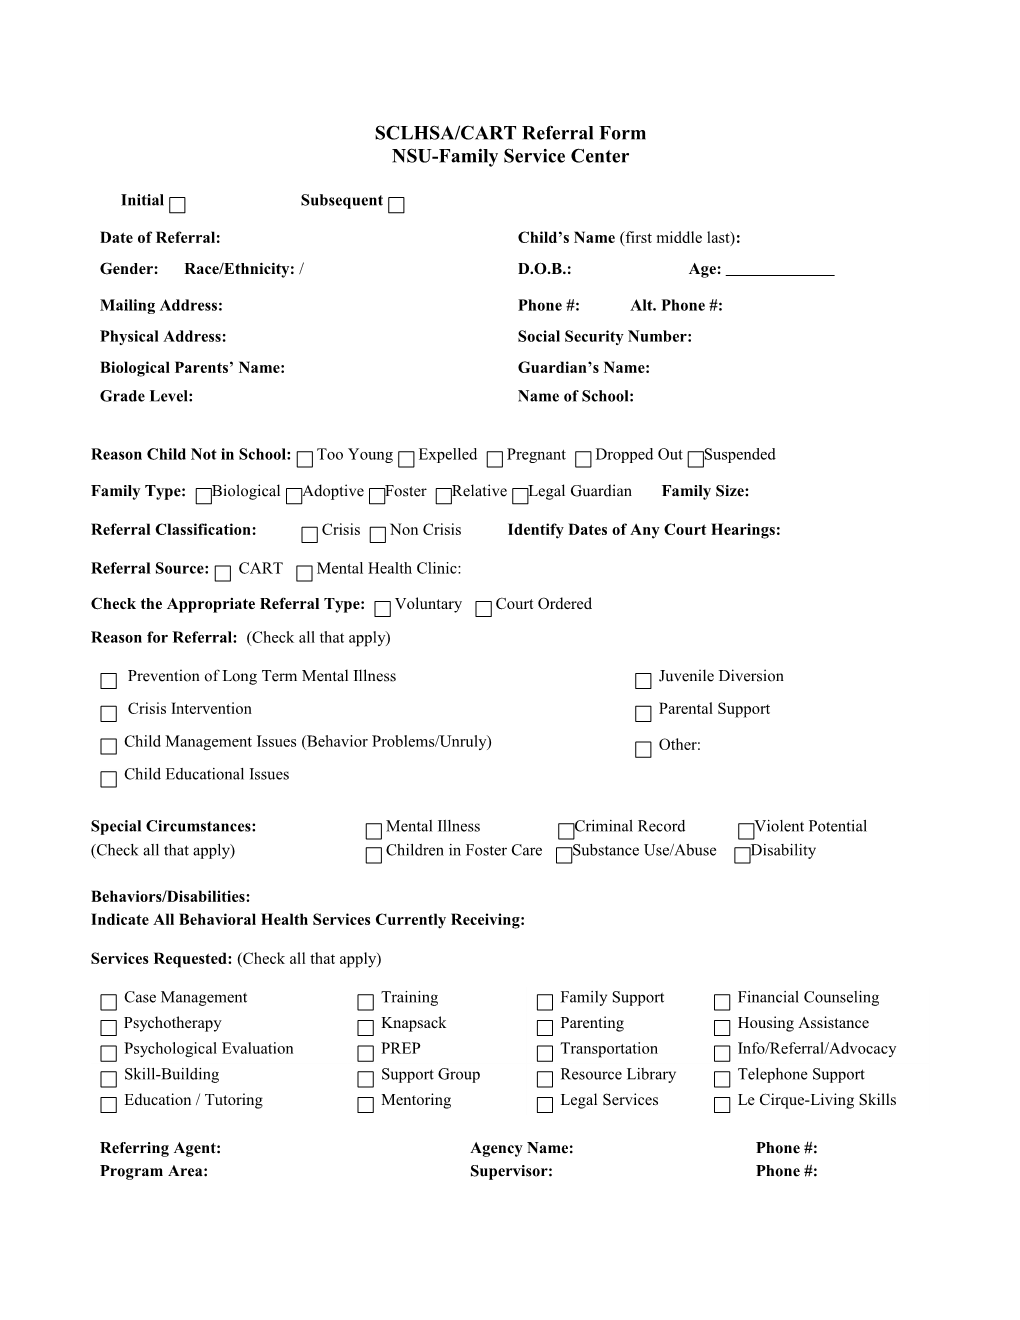 SCLHSA/CART Referral Form